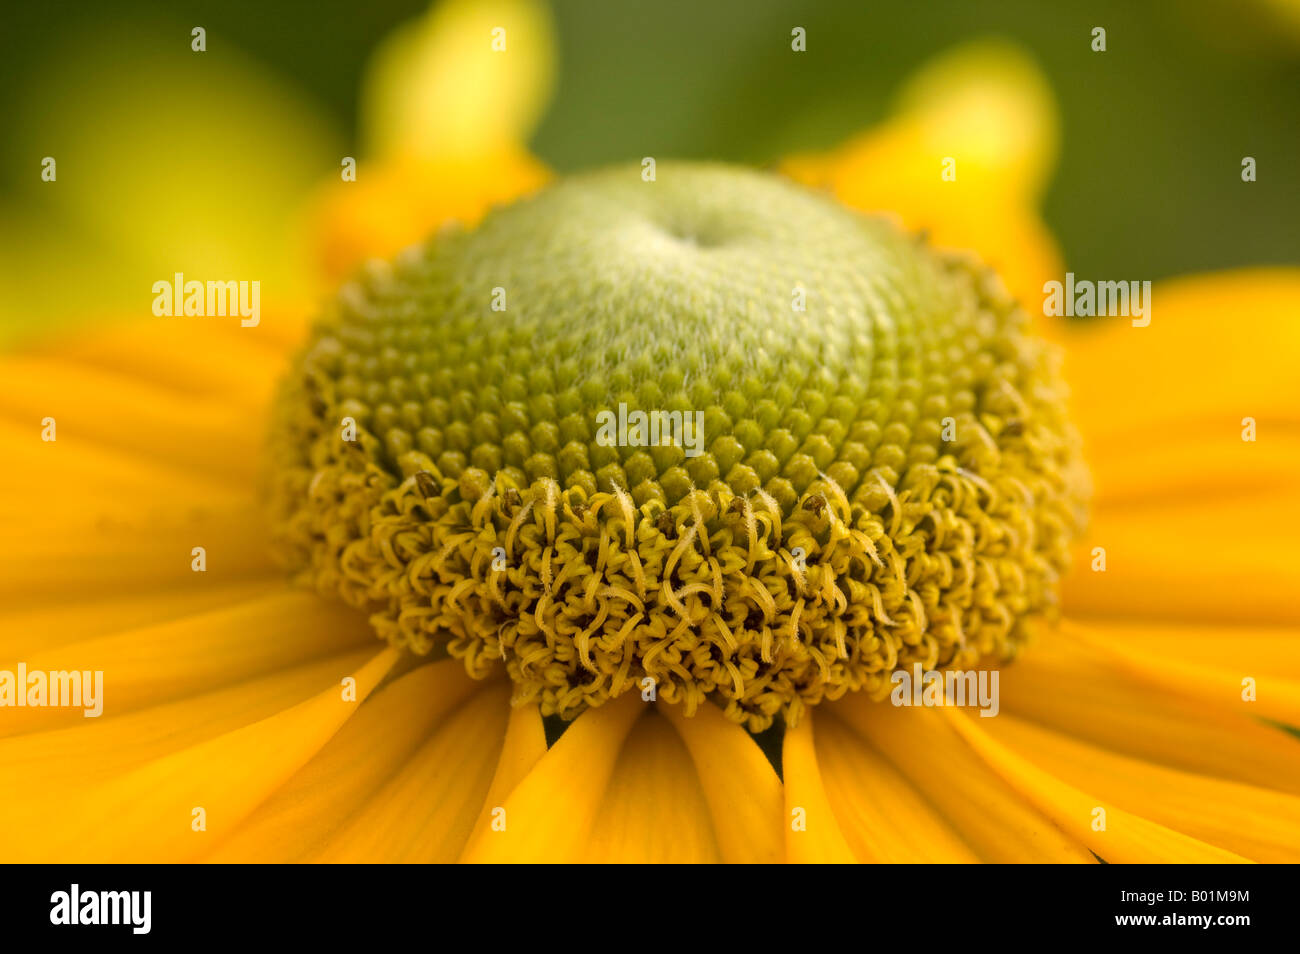 Intricate detail of domed centre and golden petals of Rudbeckia flower Stock Photo